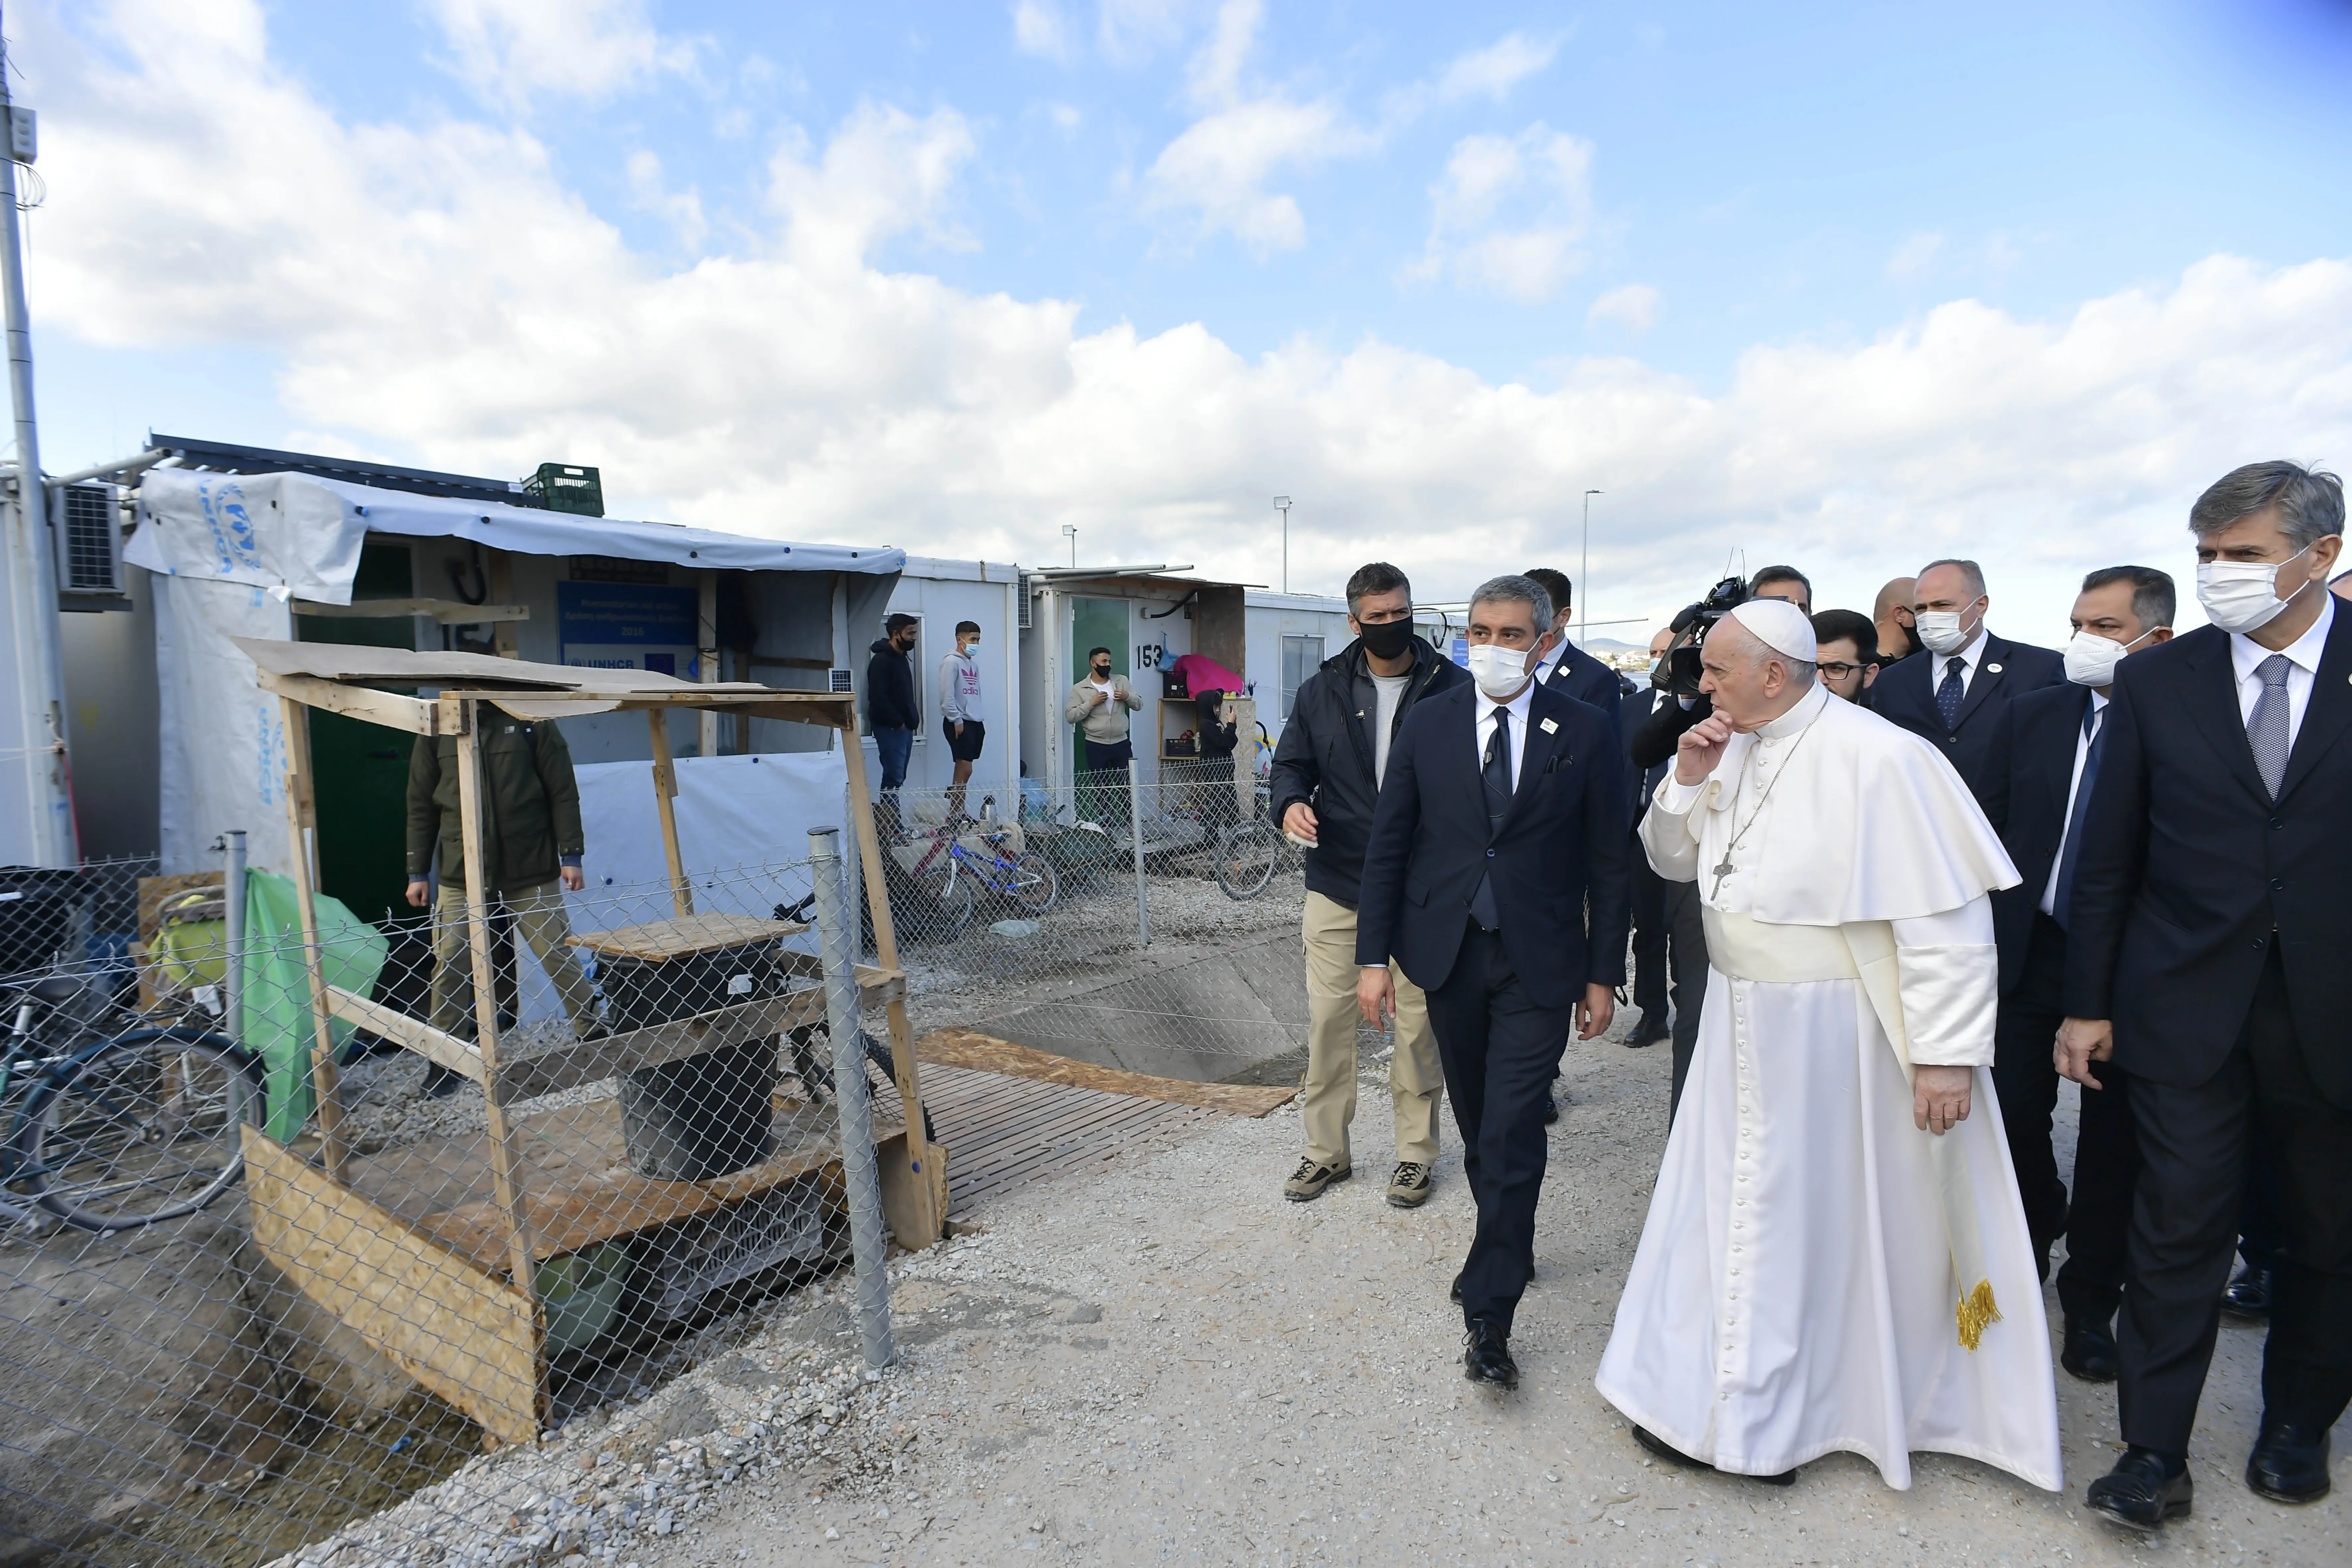 Pope Francis visits the Mavrovouni refugee camp on the Greek island of Lesbos on Dec. 5, 2021. Vatican Media